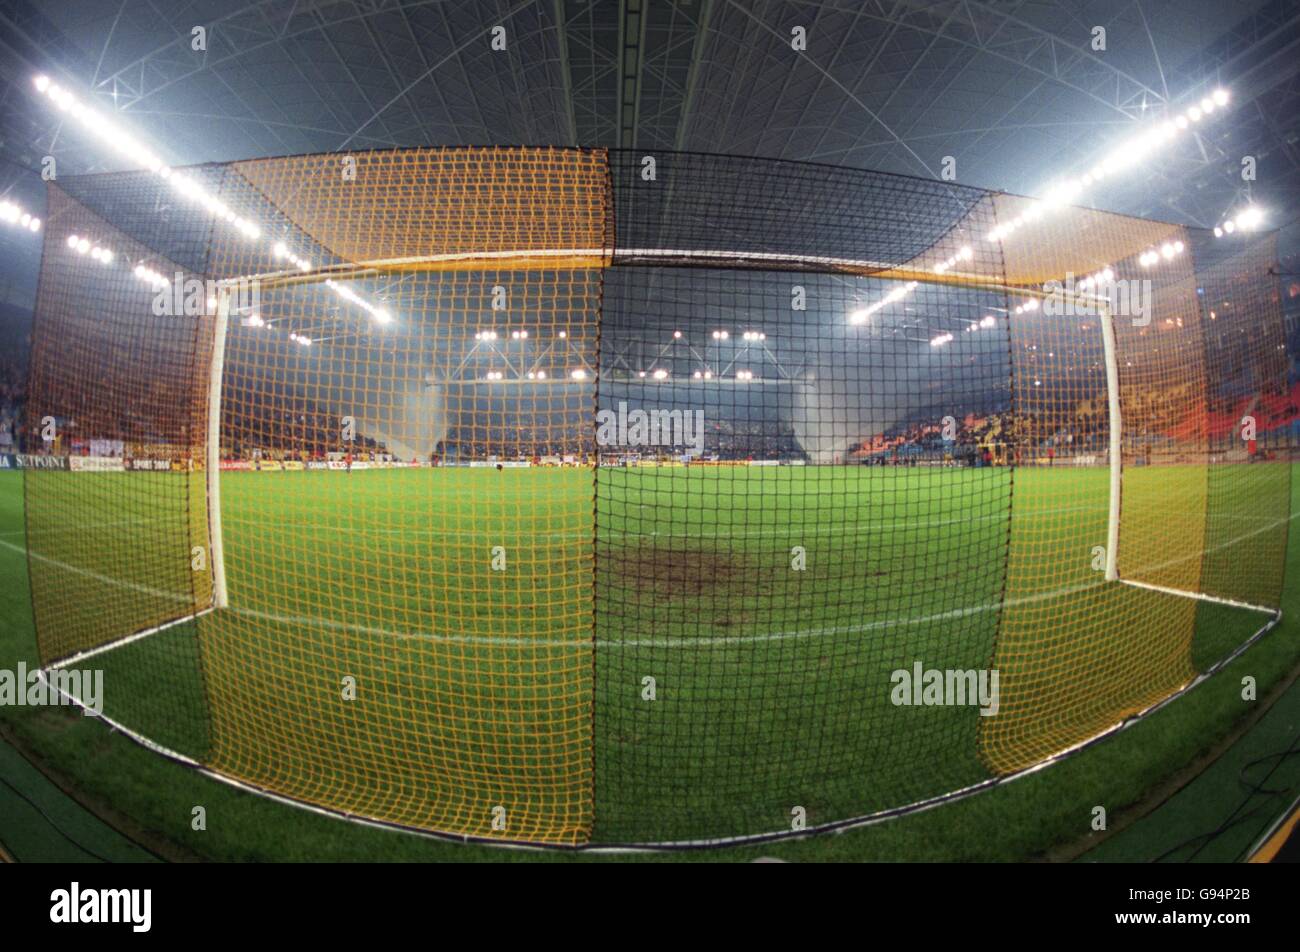 A view of the Gelre Dome, home of Vitesse Arnhem, from behind one of the colour co-ordinated nets The Gelre Dome, Stadium home of Vitesse Arnhem Gelredome Stock Photo